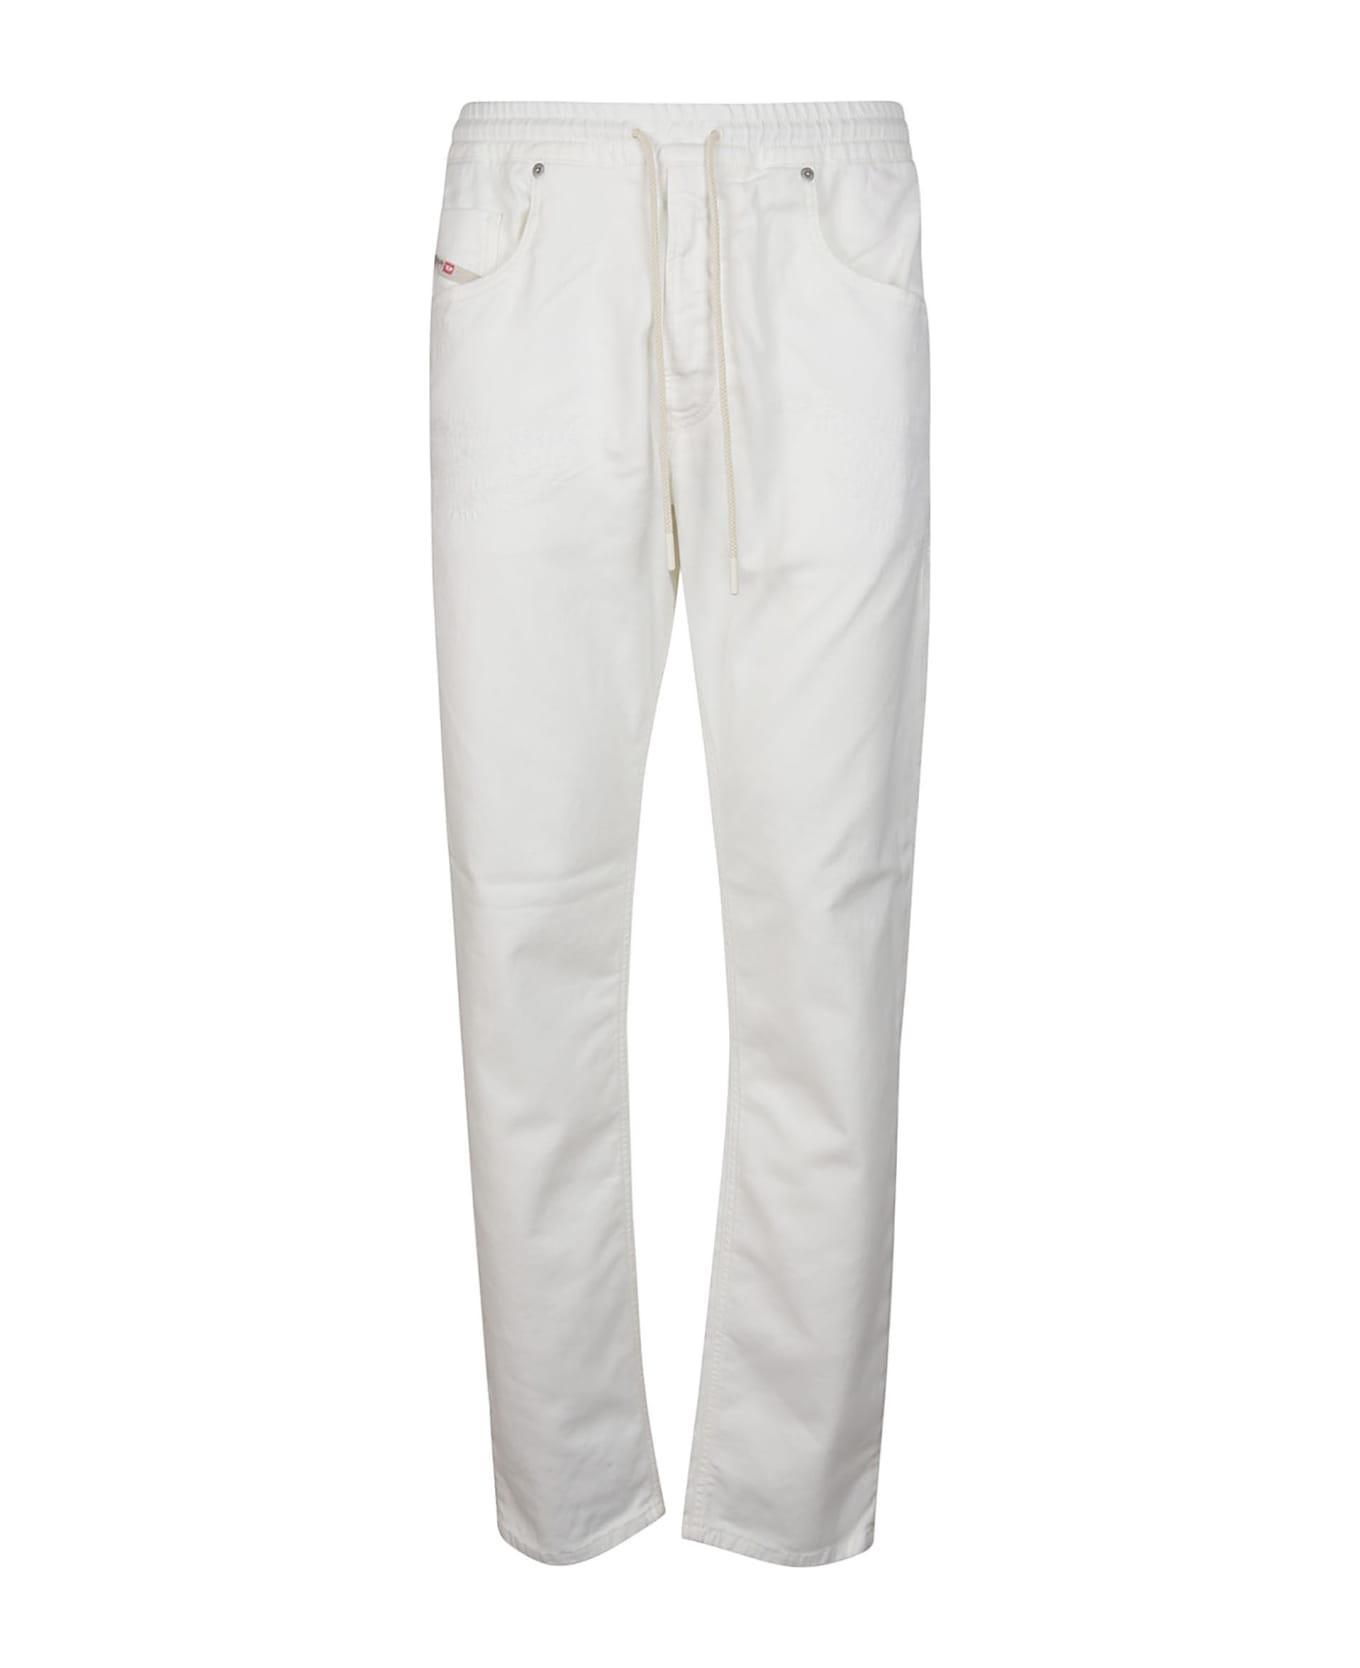 Diesel 2030 D-krooley Jogg Sweat Jeans - White ボトムス